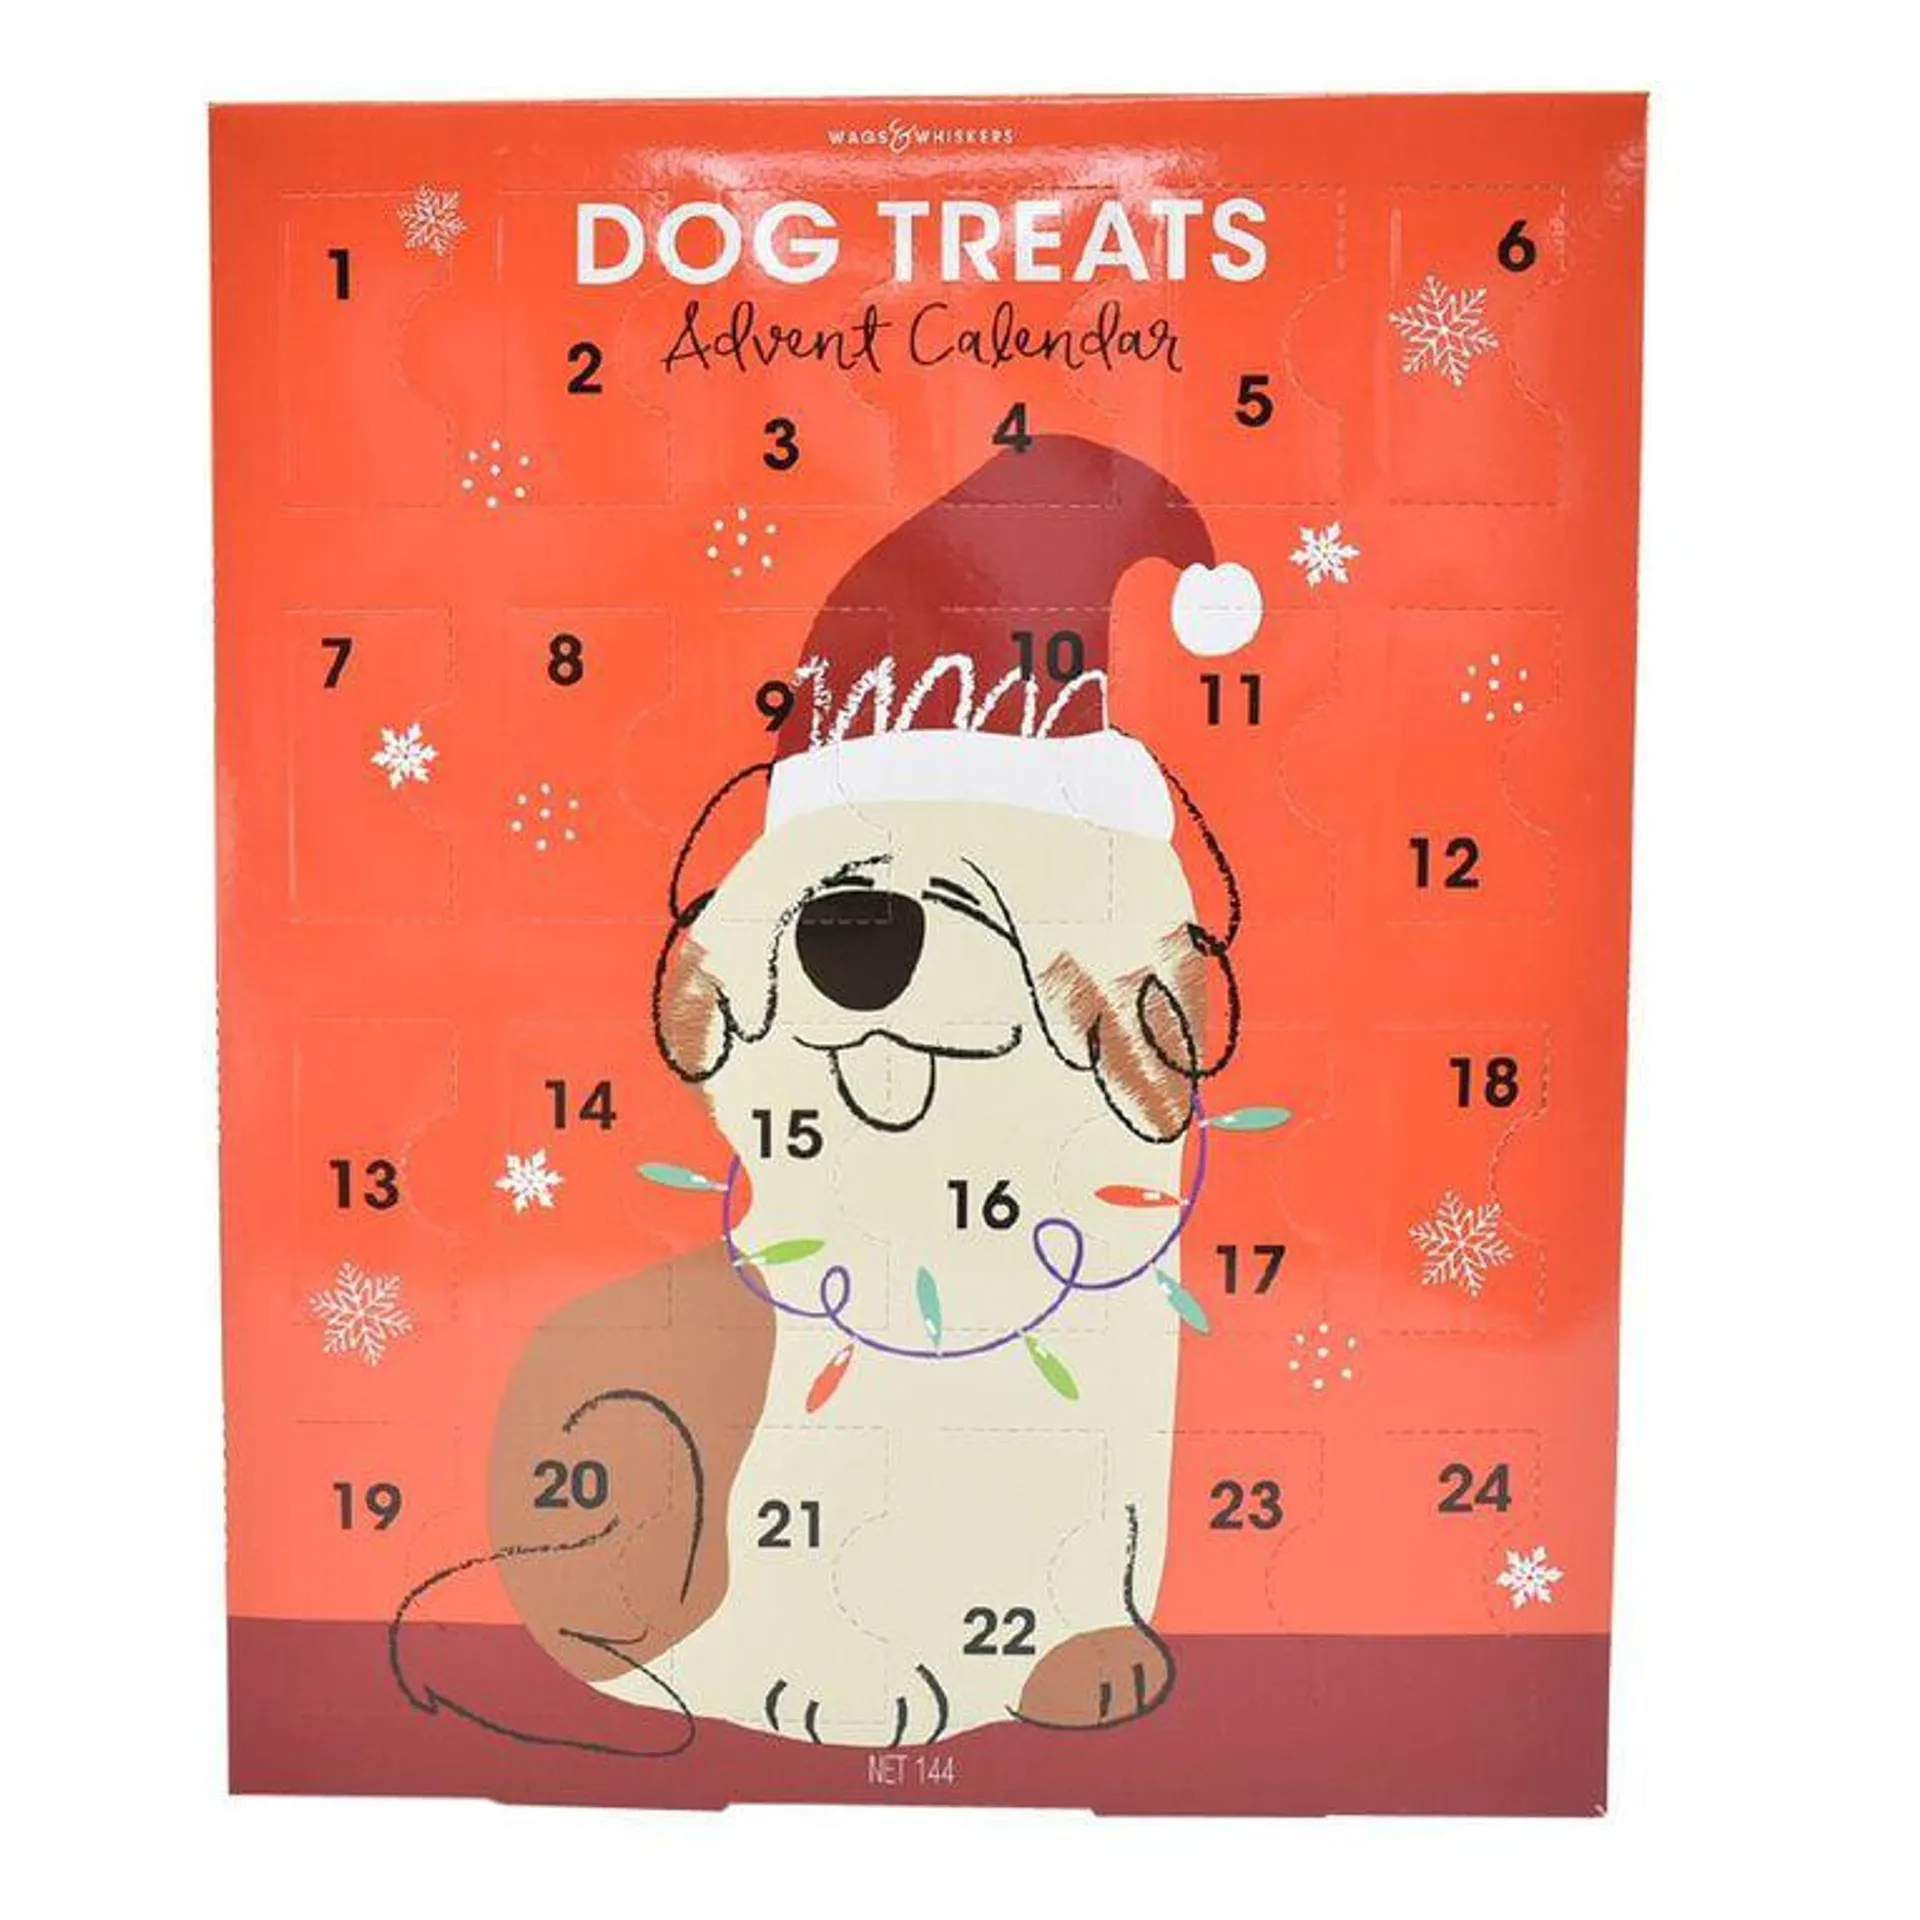 Wags & Whiskers Dog Treats Advent Calendar